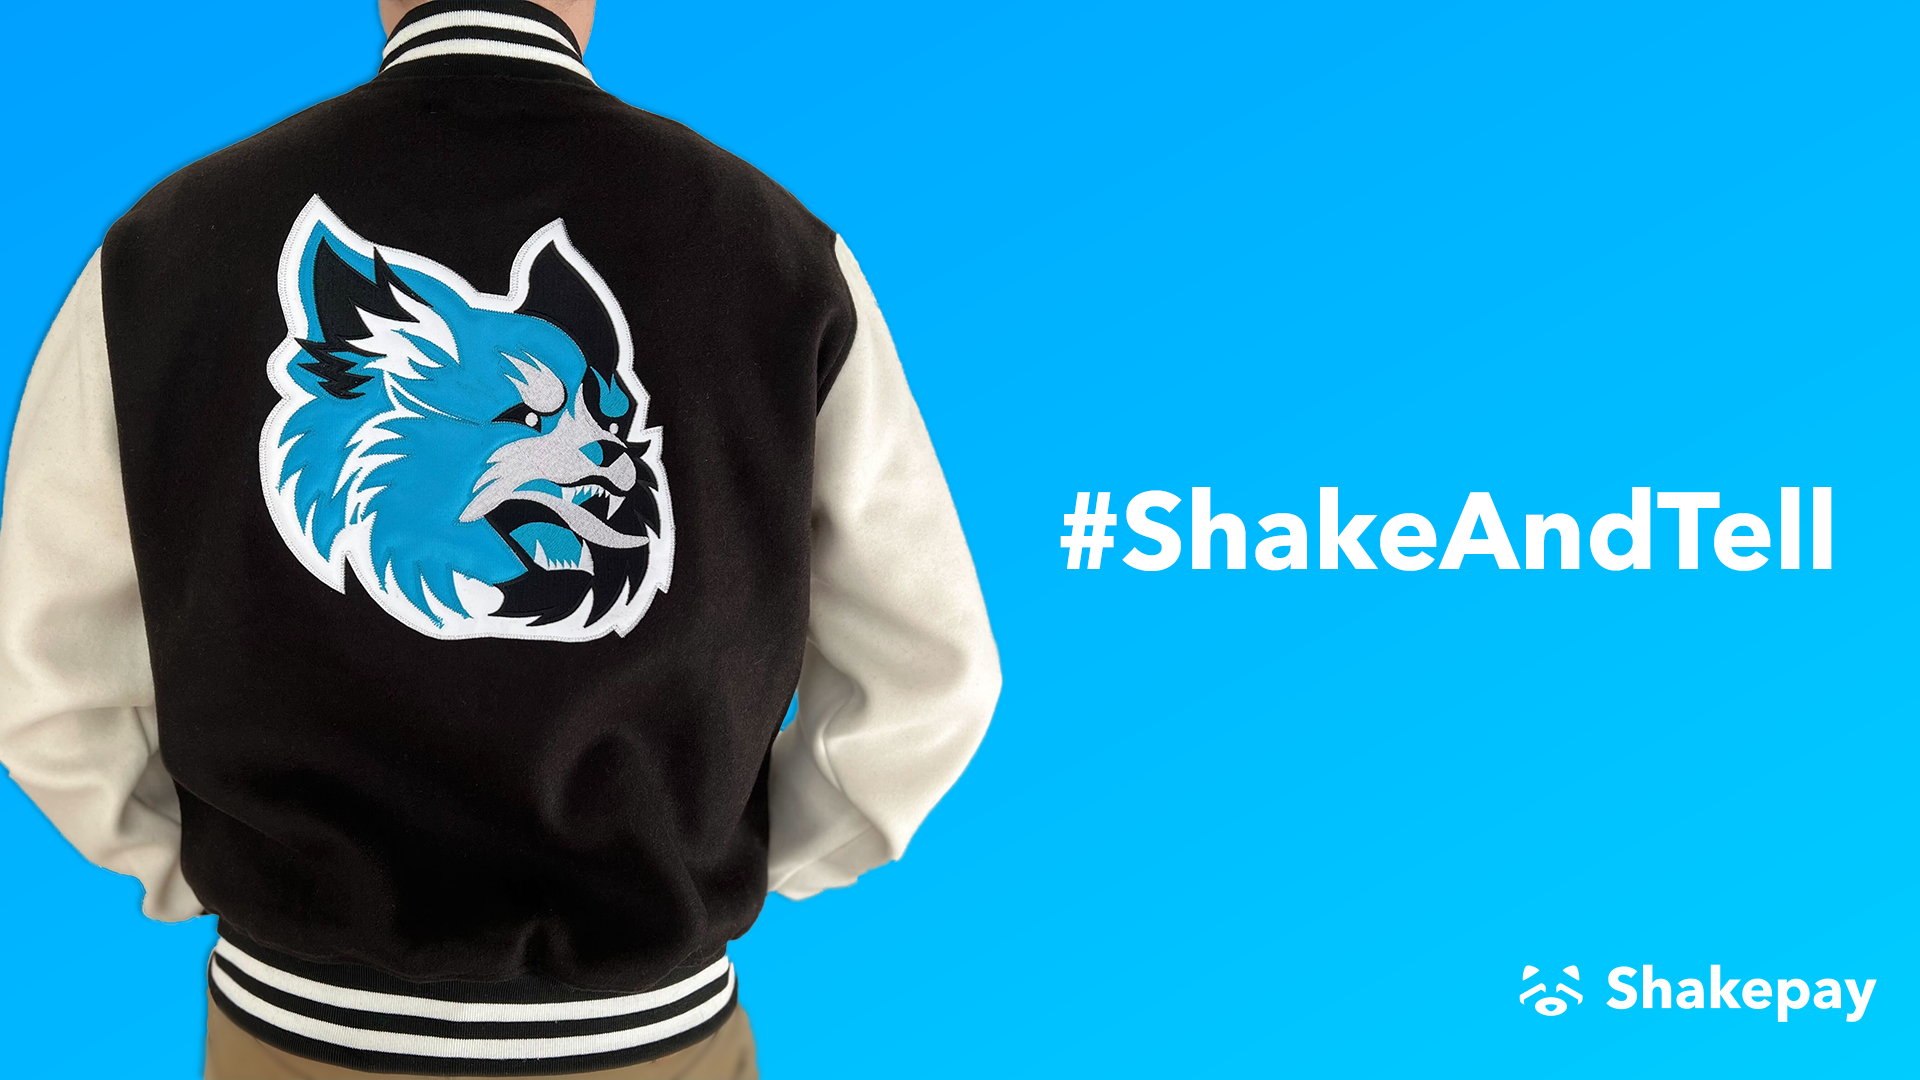 It's time to #ShakeAndTell!